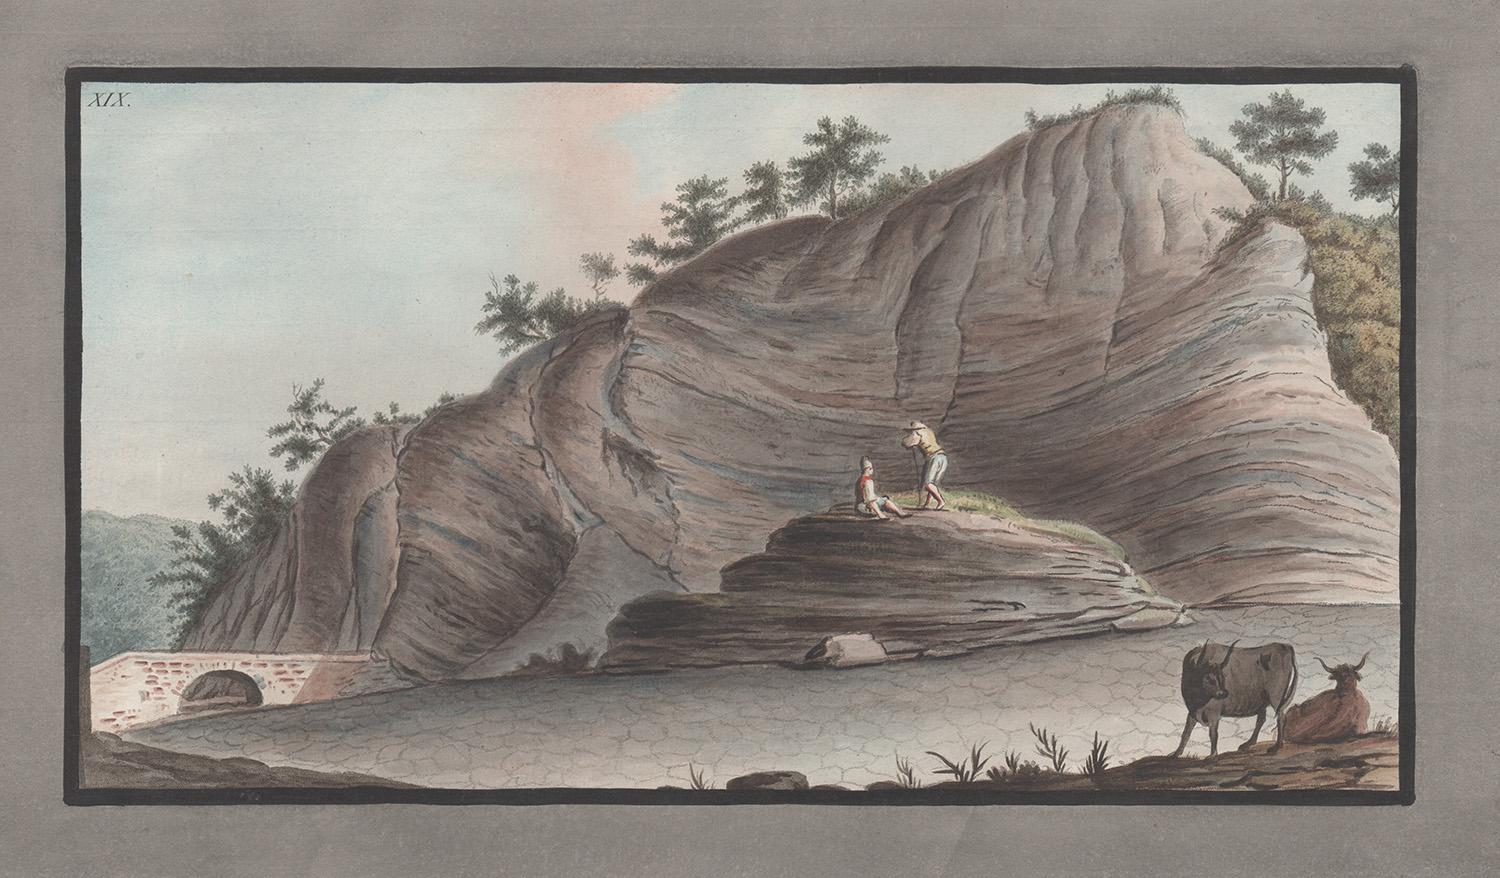 Pietro Fabris Landscape Print - Campi Phlegraei - View of a section of a part of the cone of Astruni, Italy